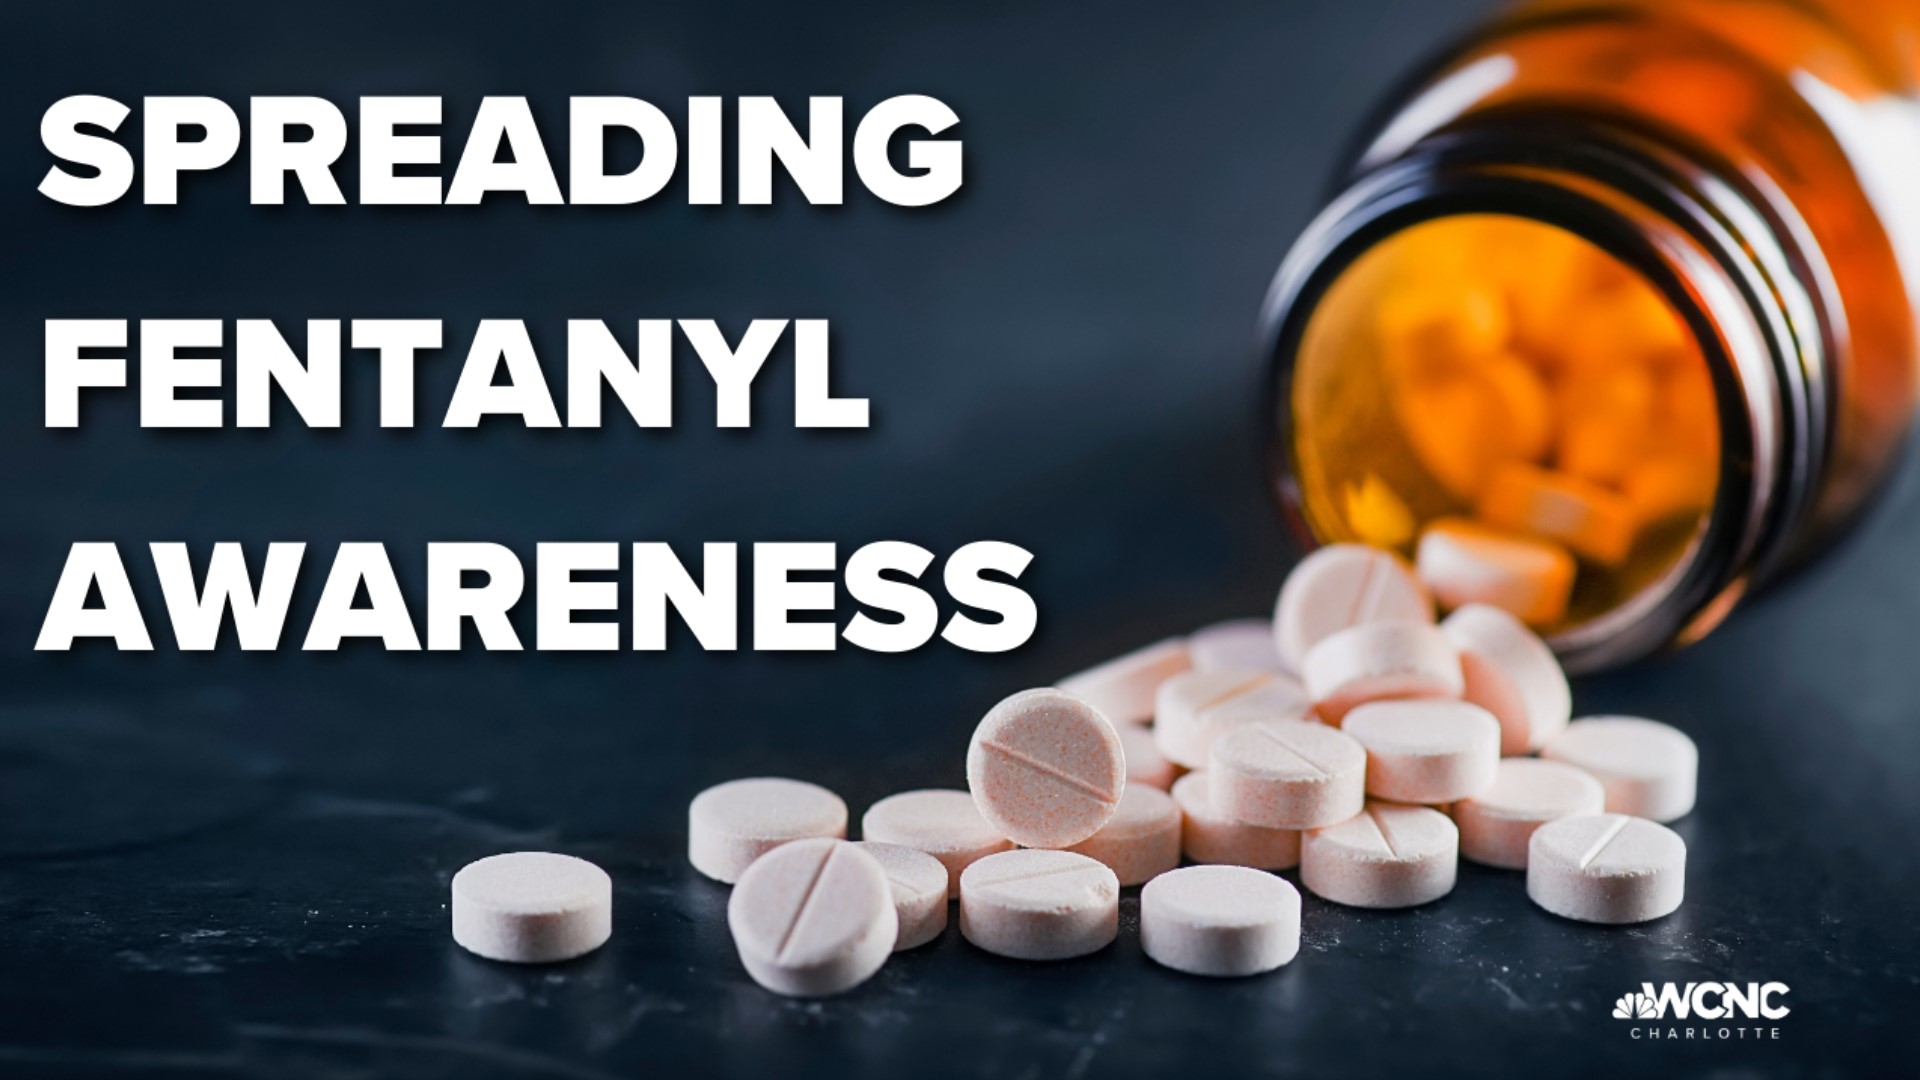 Efforts to educate people on the dangerous truth of fentanyl